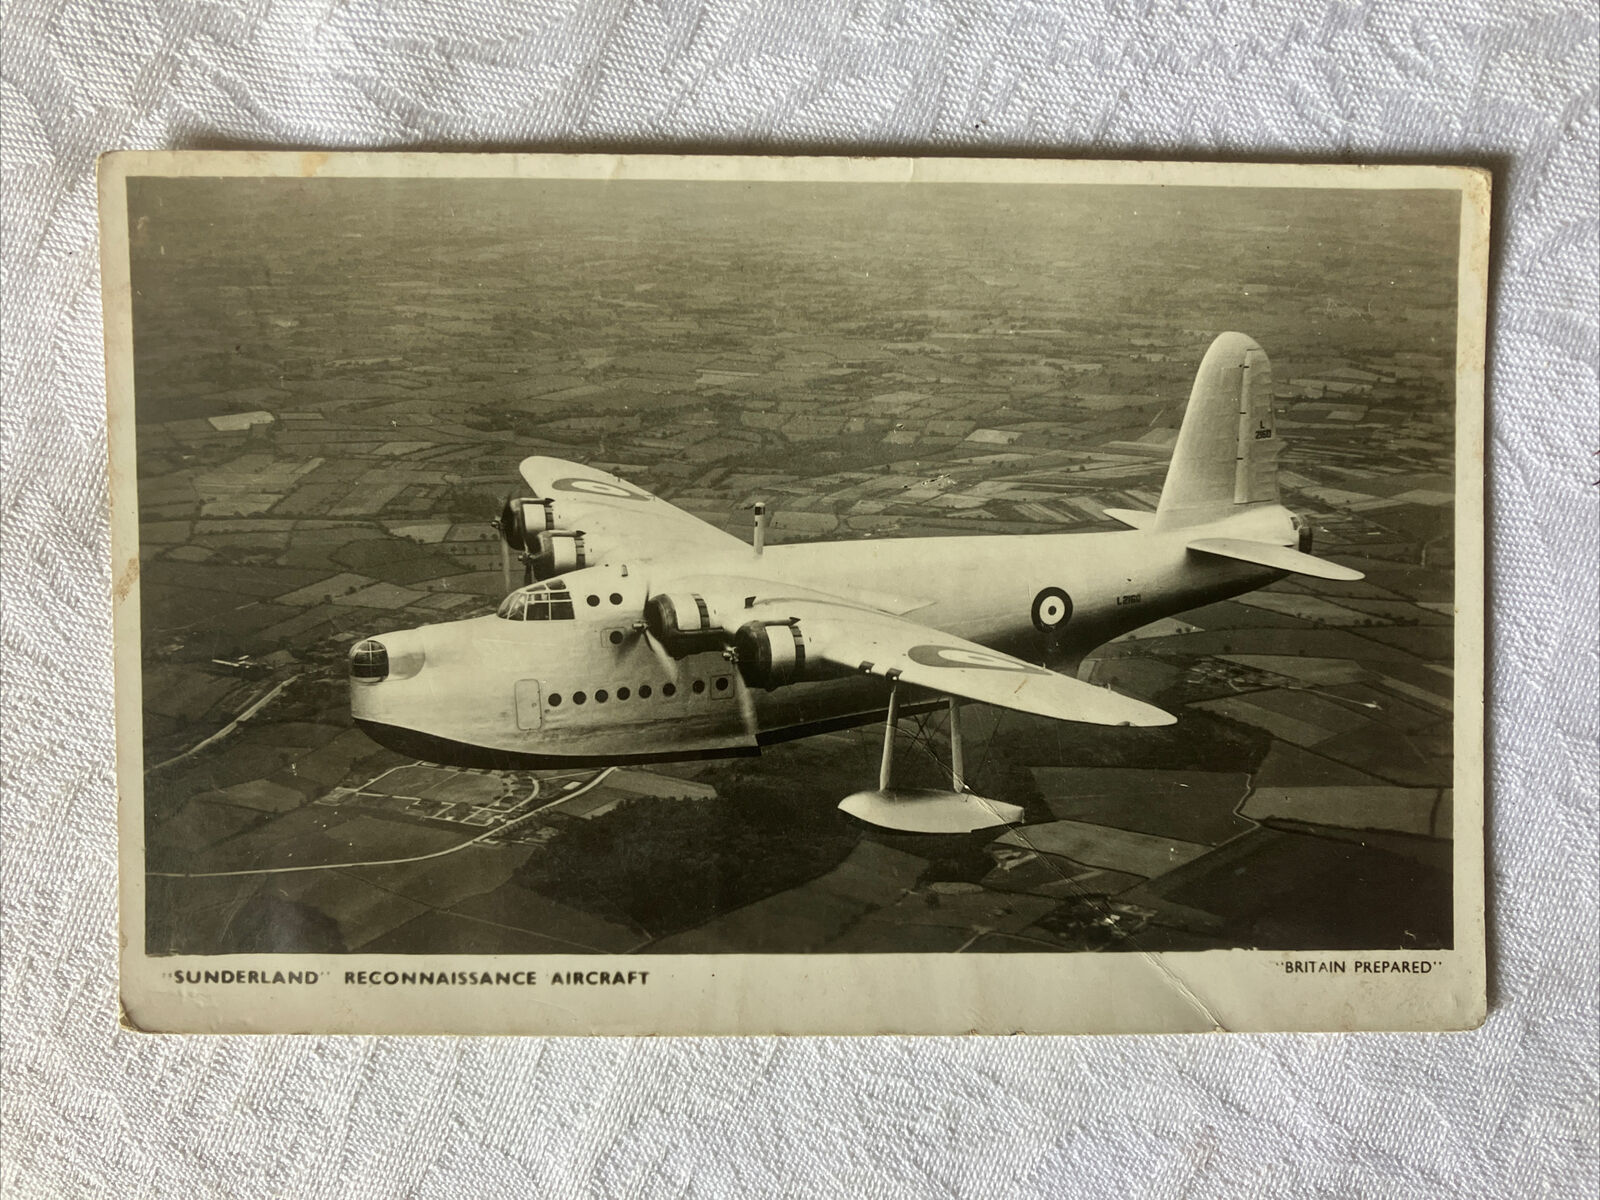 House Clearance - Sunderland Reconnaissance Aircraft Flying Boat service 854